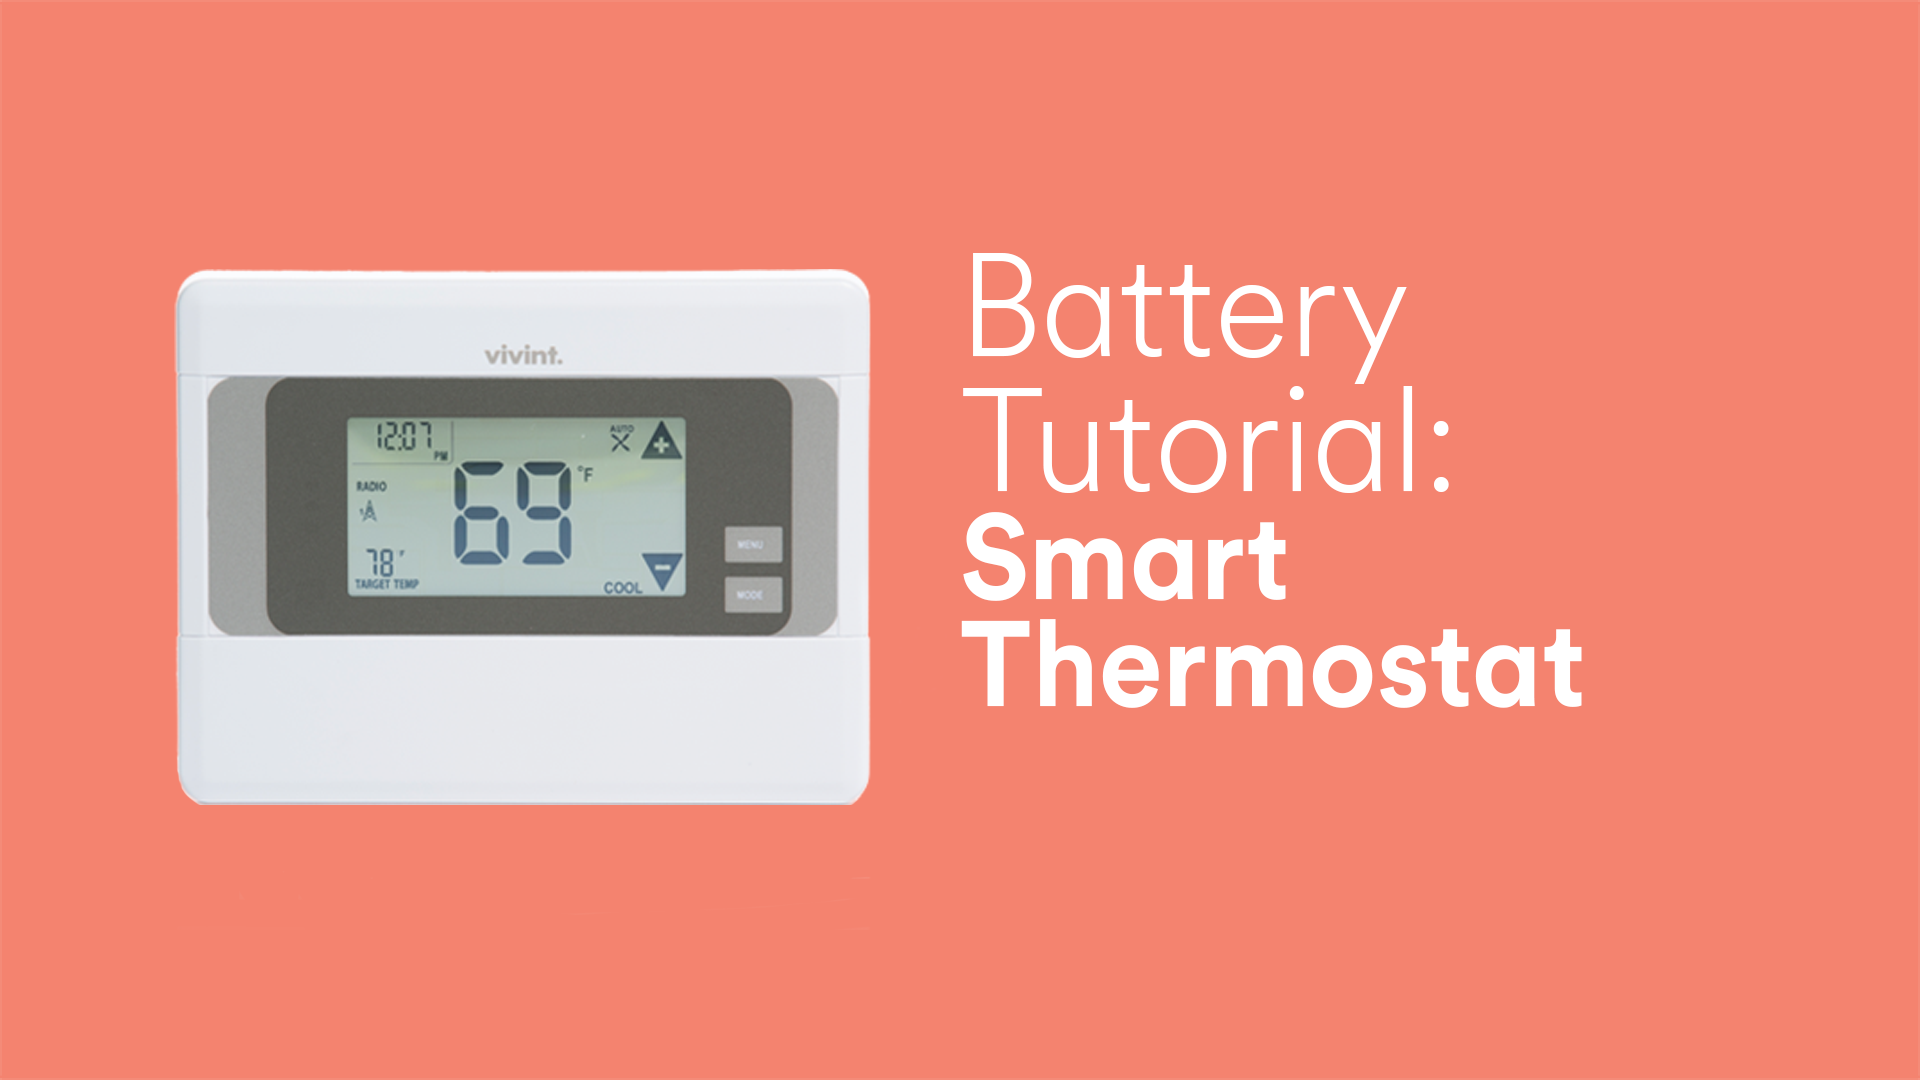 Battery Tutorial: Smart Thermostat - Video Support Hub